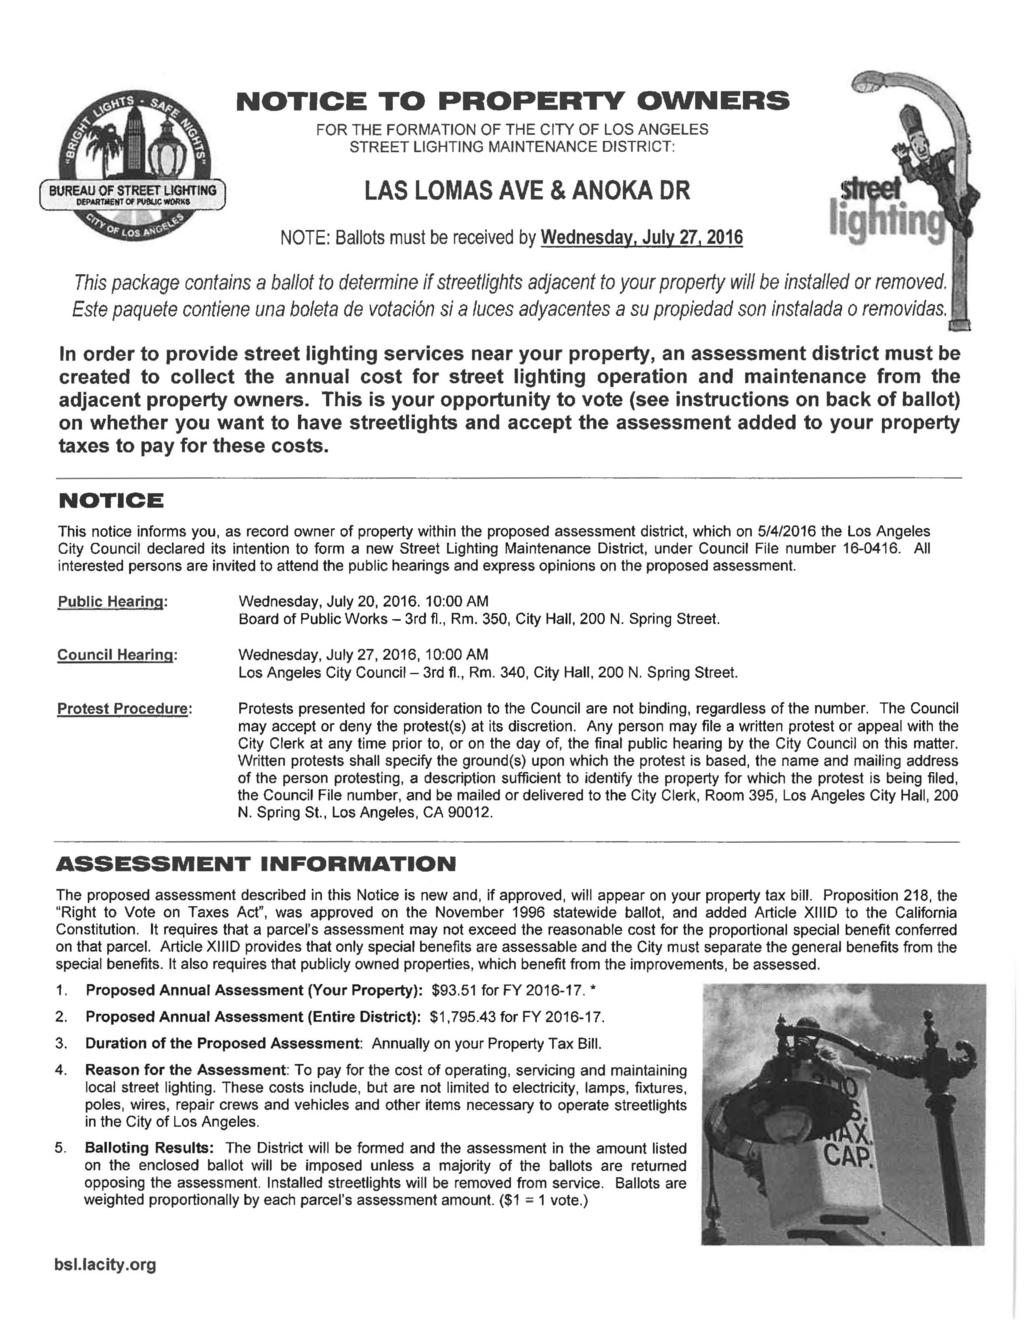 NOTICE TO PROPERTY OWNERS r; BUREAU OF STREET LIGHTING OSMiHntWT Of PVSUC WORKS Vs FOR THE FORMATION OF THE CITY OF LOS ANGELES STREET LIGHTING MAINTENANCE DISTRICT: LAS LOMAS AVE & ANOKA DR NOTE: